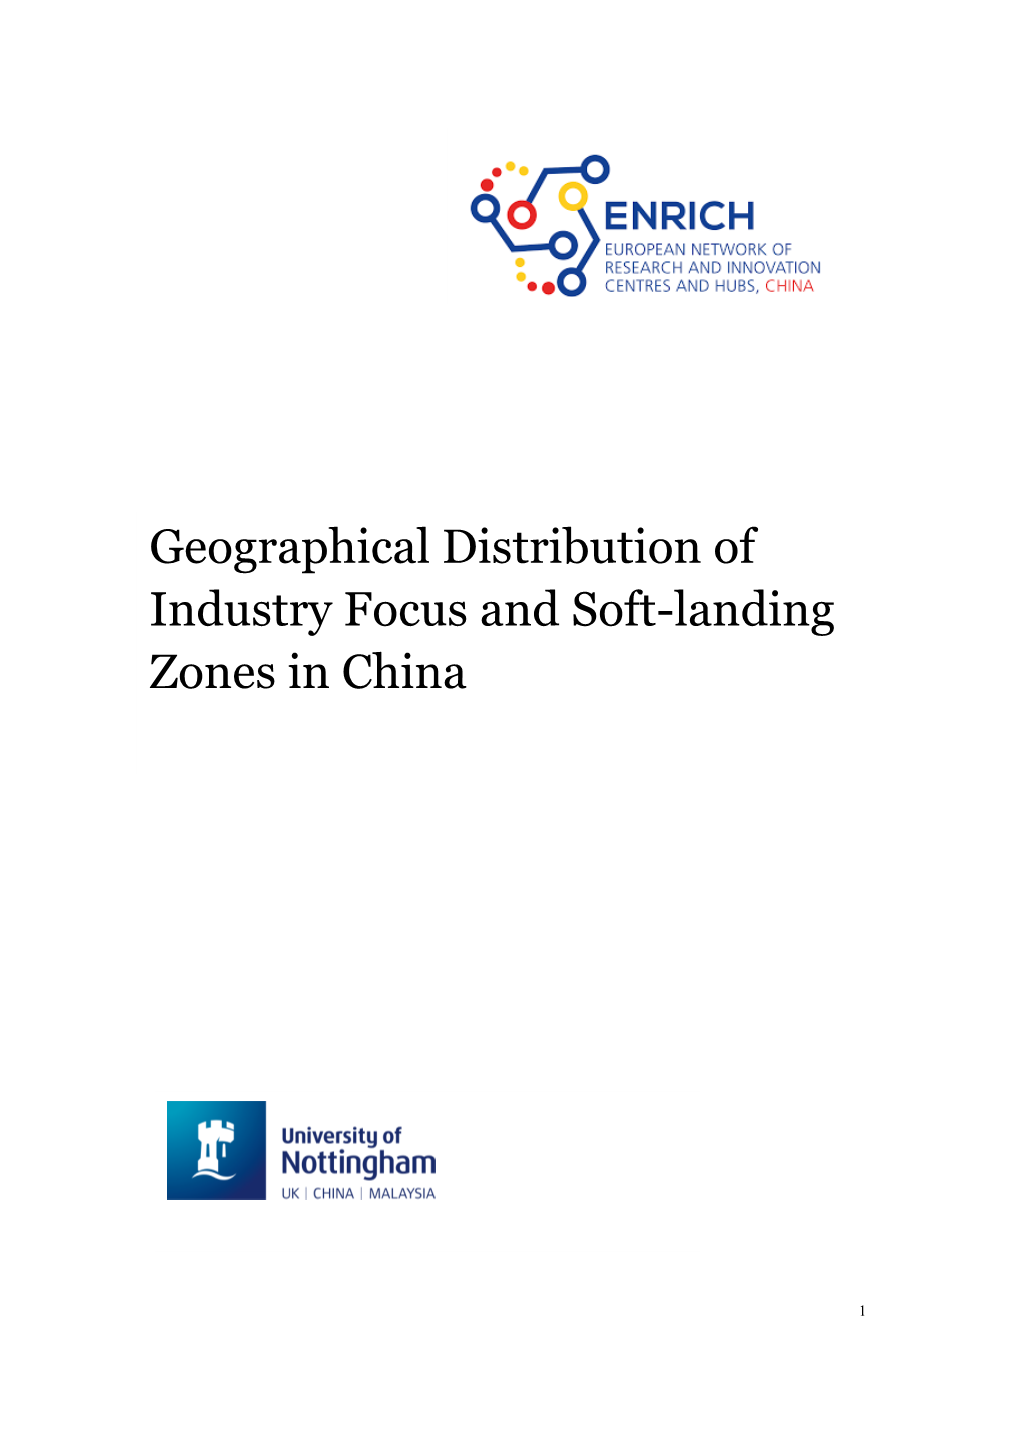 Geographical Distribution of Industry Focus and Soft-Landing Zones in China